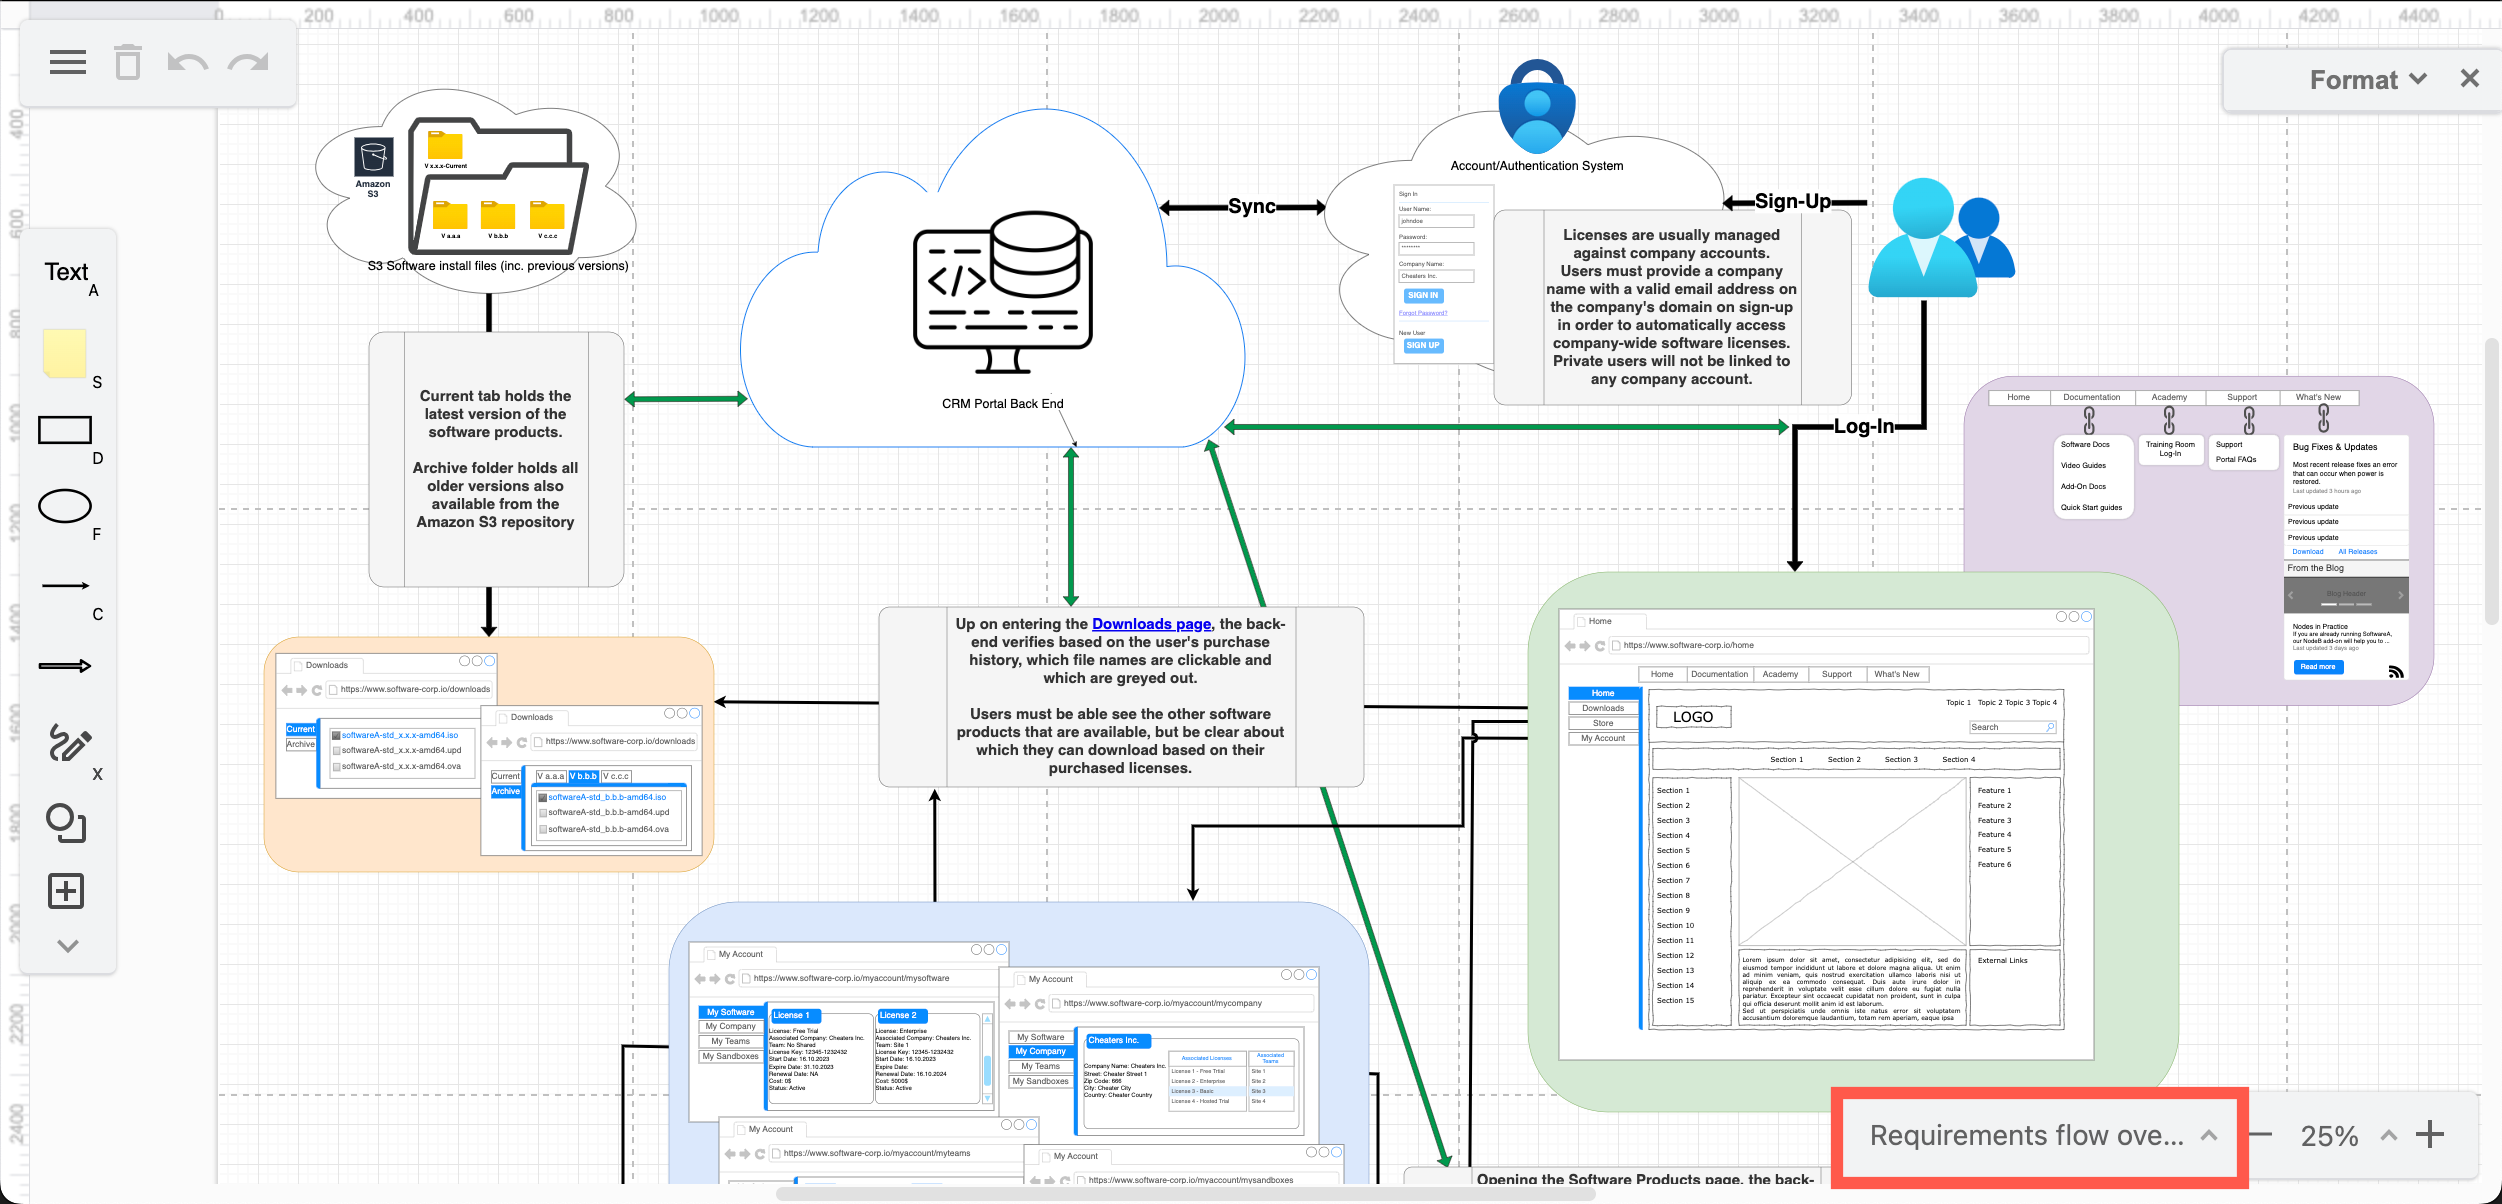 Multiple pages in a multi-page diagram are accessed via the list in the lower right of the draw.io editor when using the Sketch online whiteboard theme